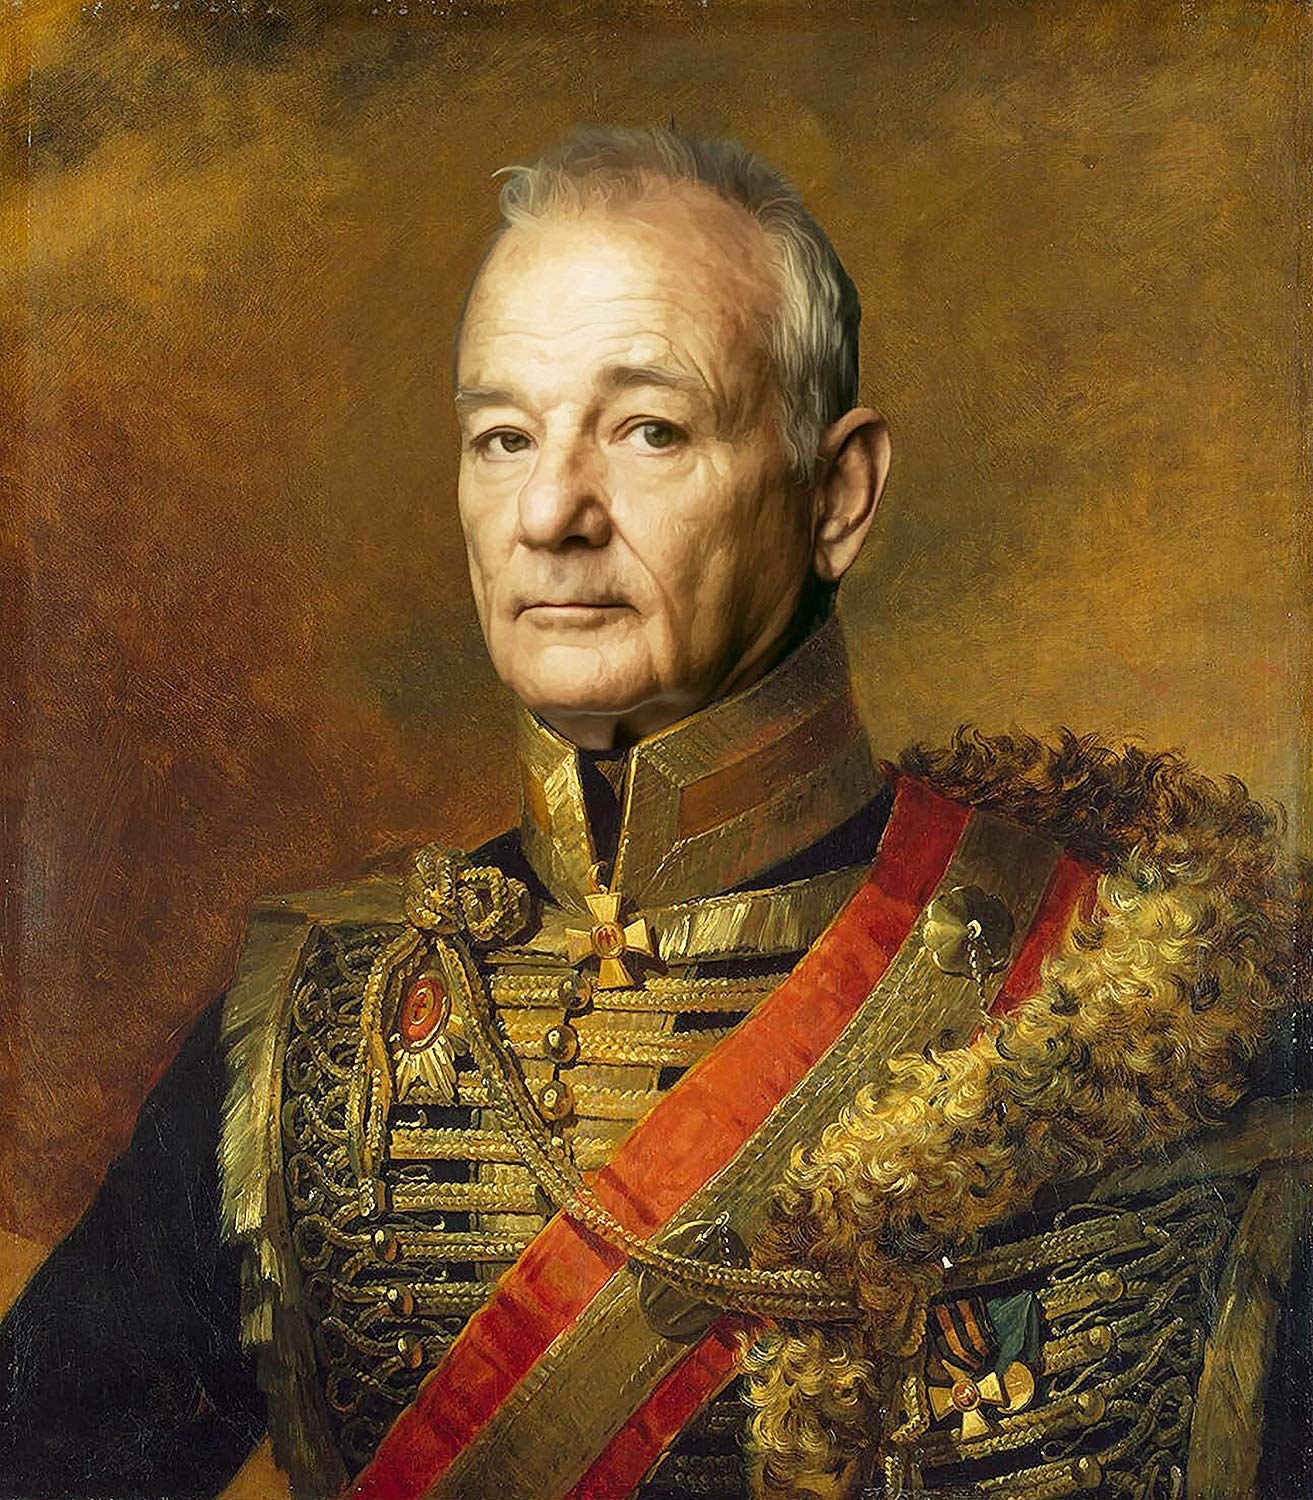 The antique style portrait of Bill Murray which looks like a military-style oil painting